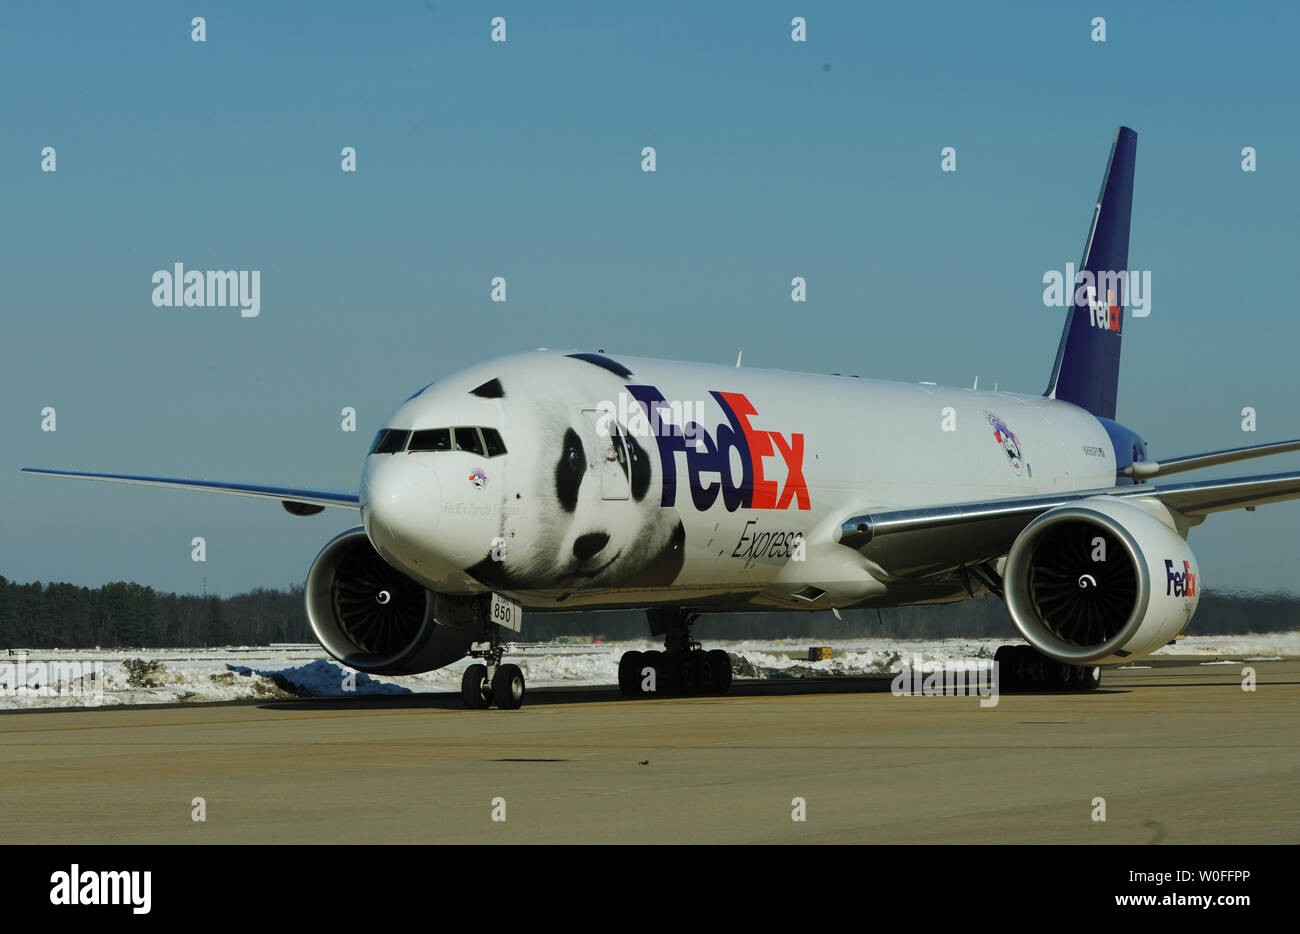 A FedEx Express 777 Freighter airplane arrives to transport Tai Shan, a 4 year old male giant panda, at Dulles Airport in Dulles, Virginia on February 4, 2010. Tai Shan and another 3 year old female panda, Mei Lan, from the Atlanta Zoo, will be transported on the 'FedEx Panda Express' to Chengdu, China to join the country's breeding and conservation program. Both pandas are owned by the Chinese government and were leased to the United States. UPI/Alexis C. Glenn. Stock Photo